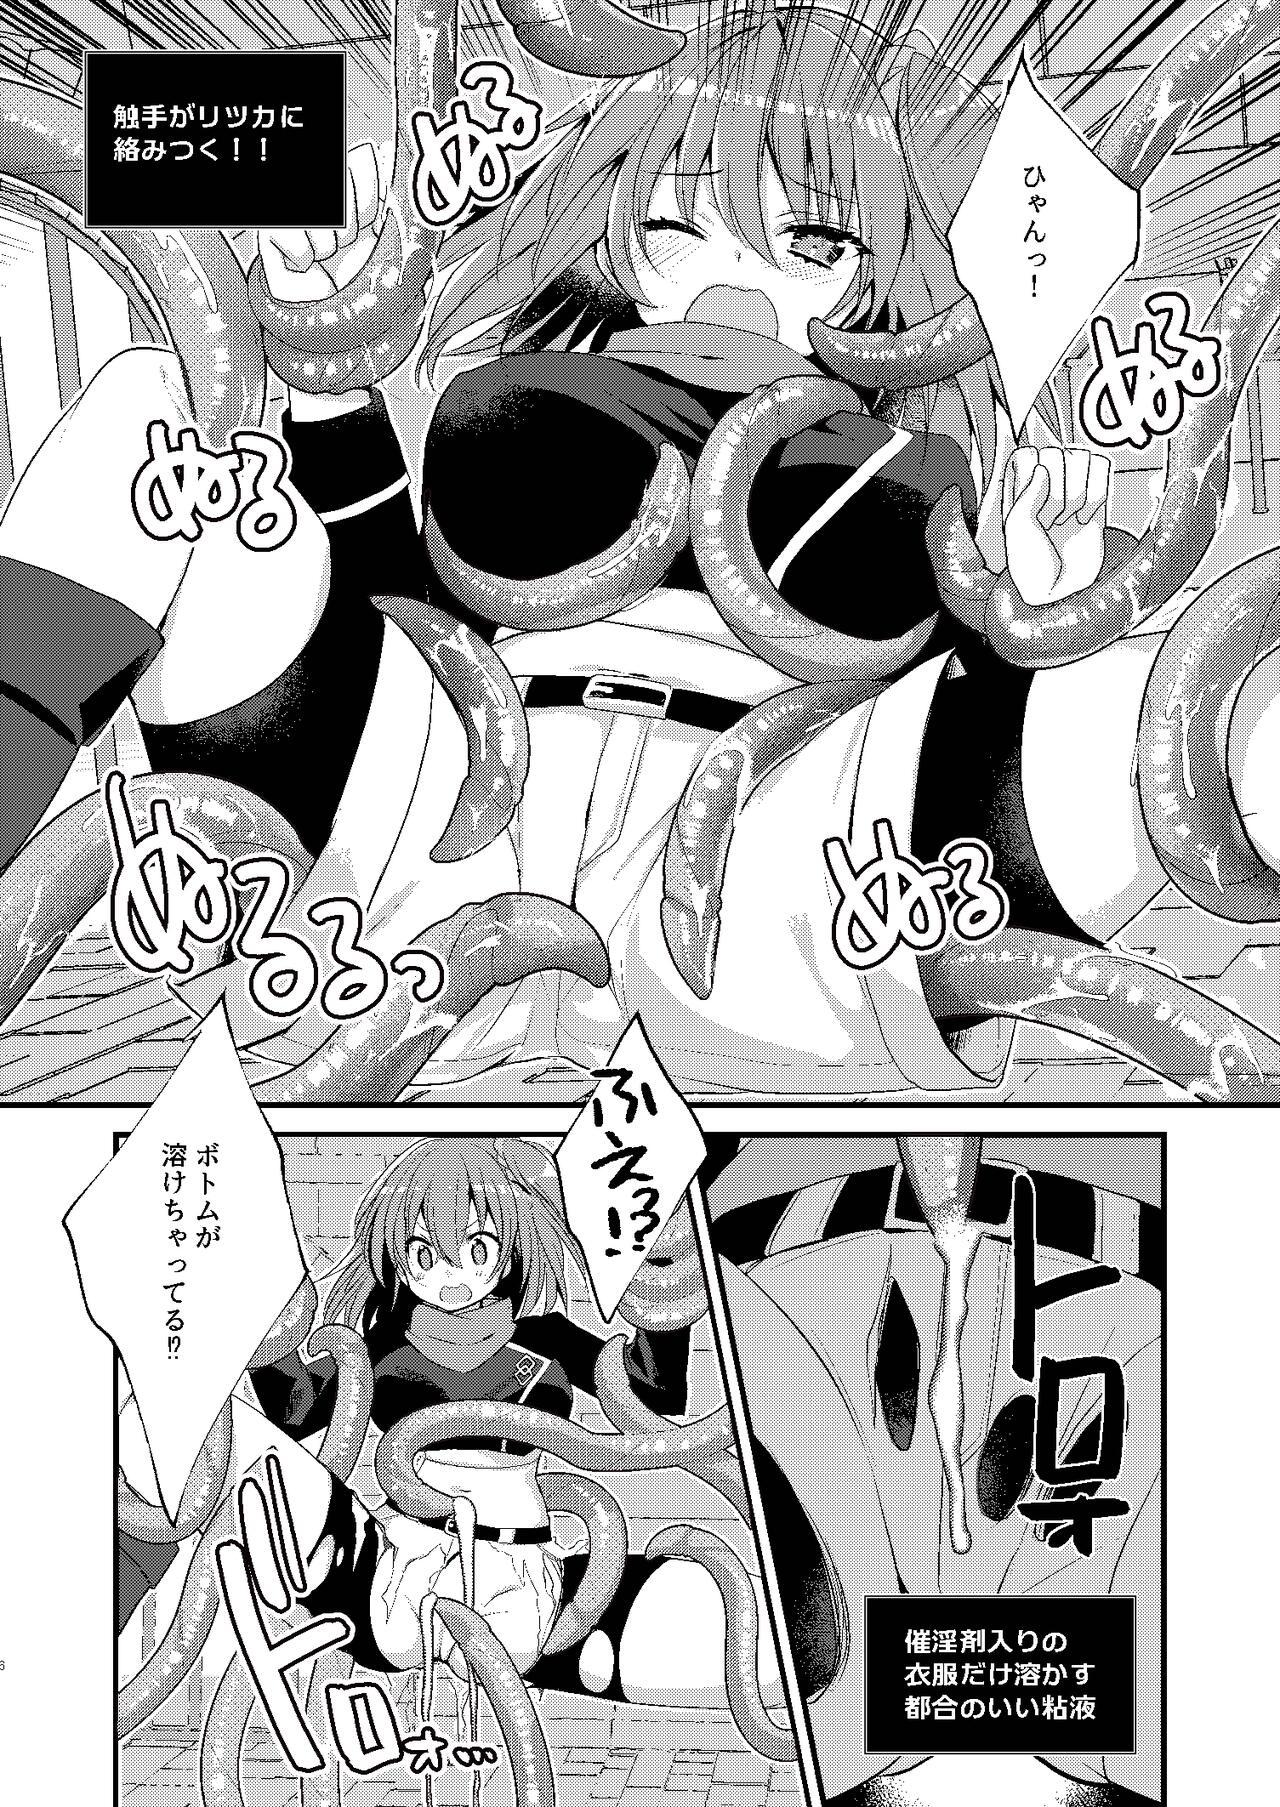 Climax BB-chan to Ero Trap Dungeon - Fate grand order Analplay - Page 6